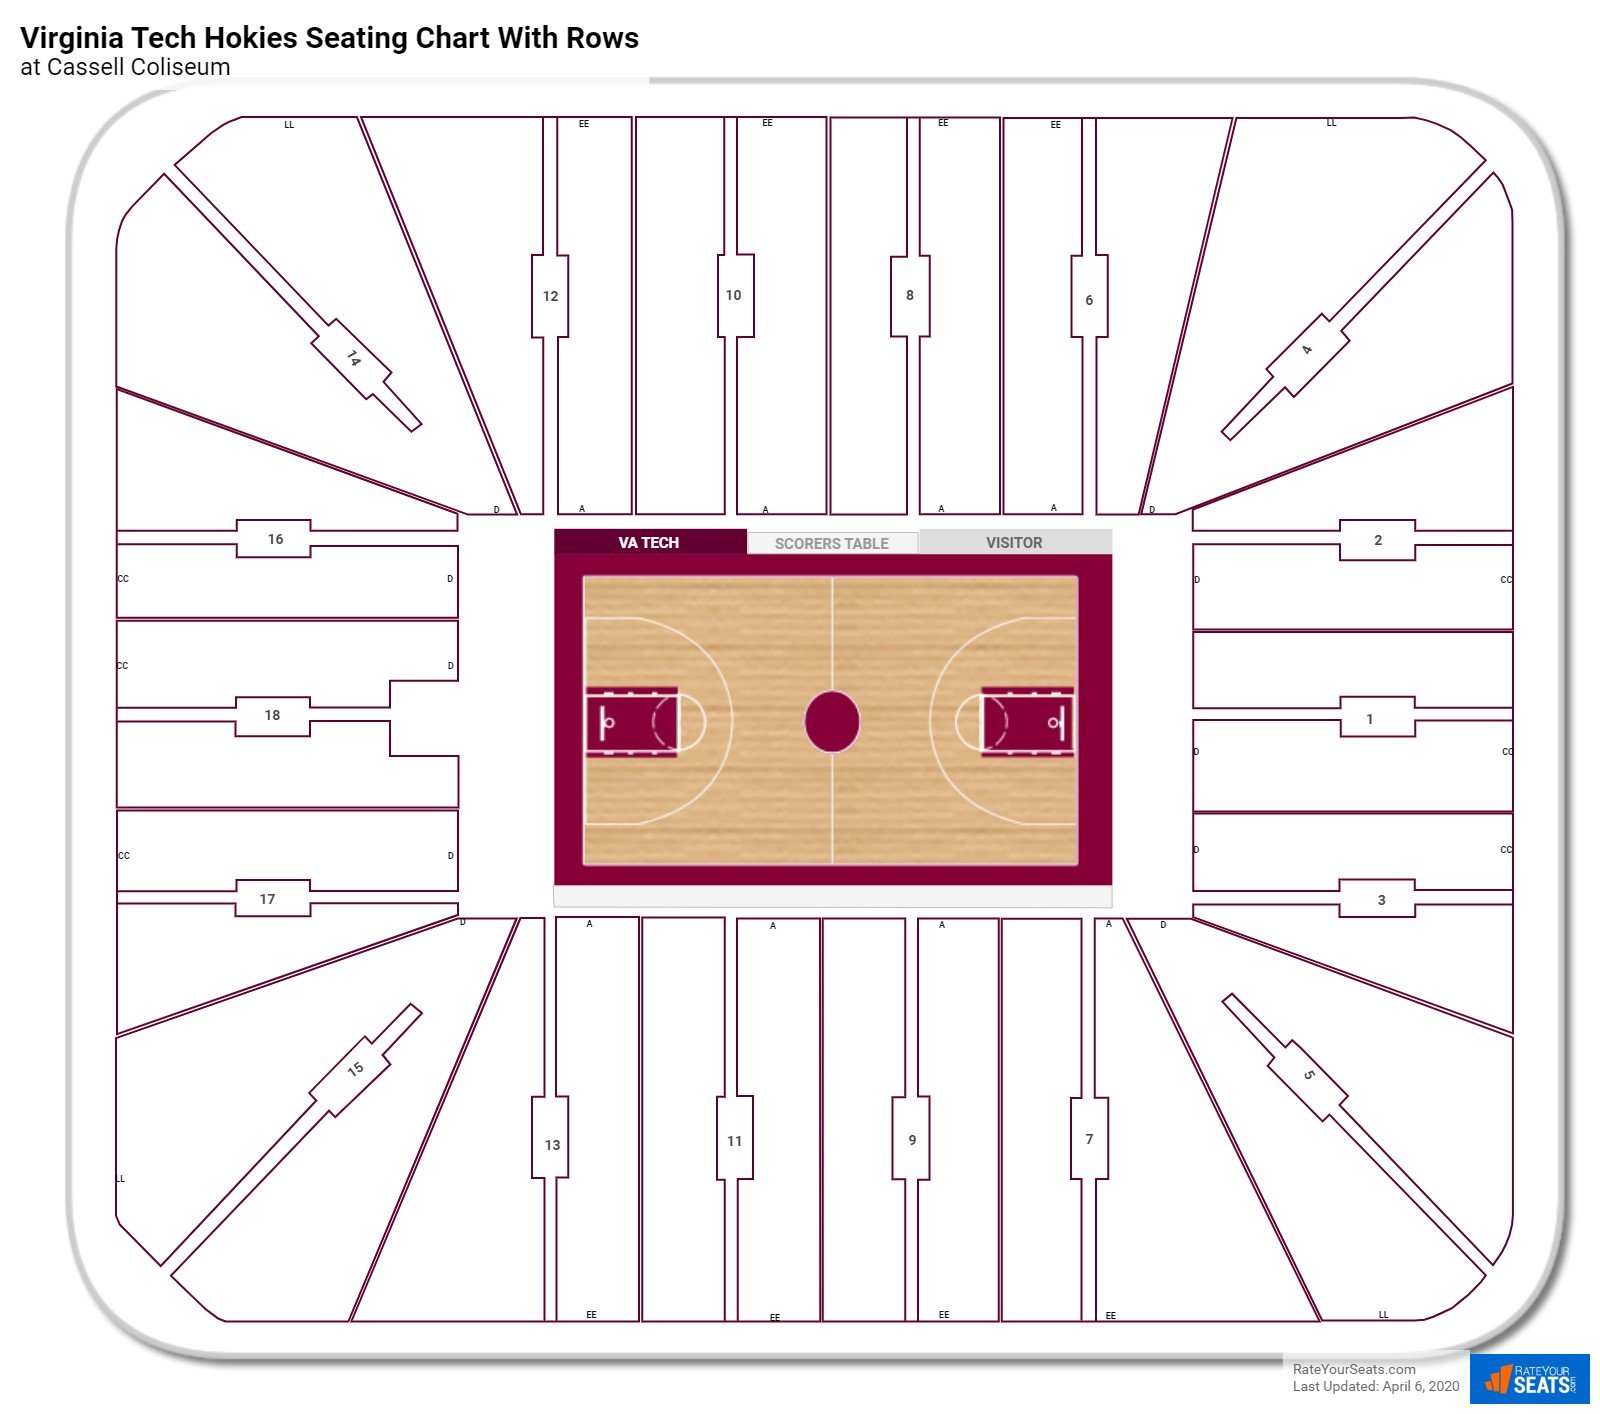 Cassell Coliseum seating chart with row numbers